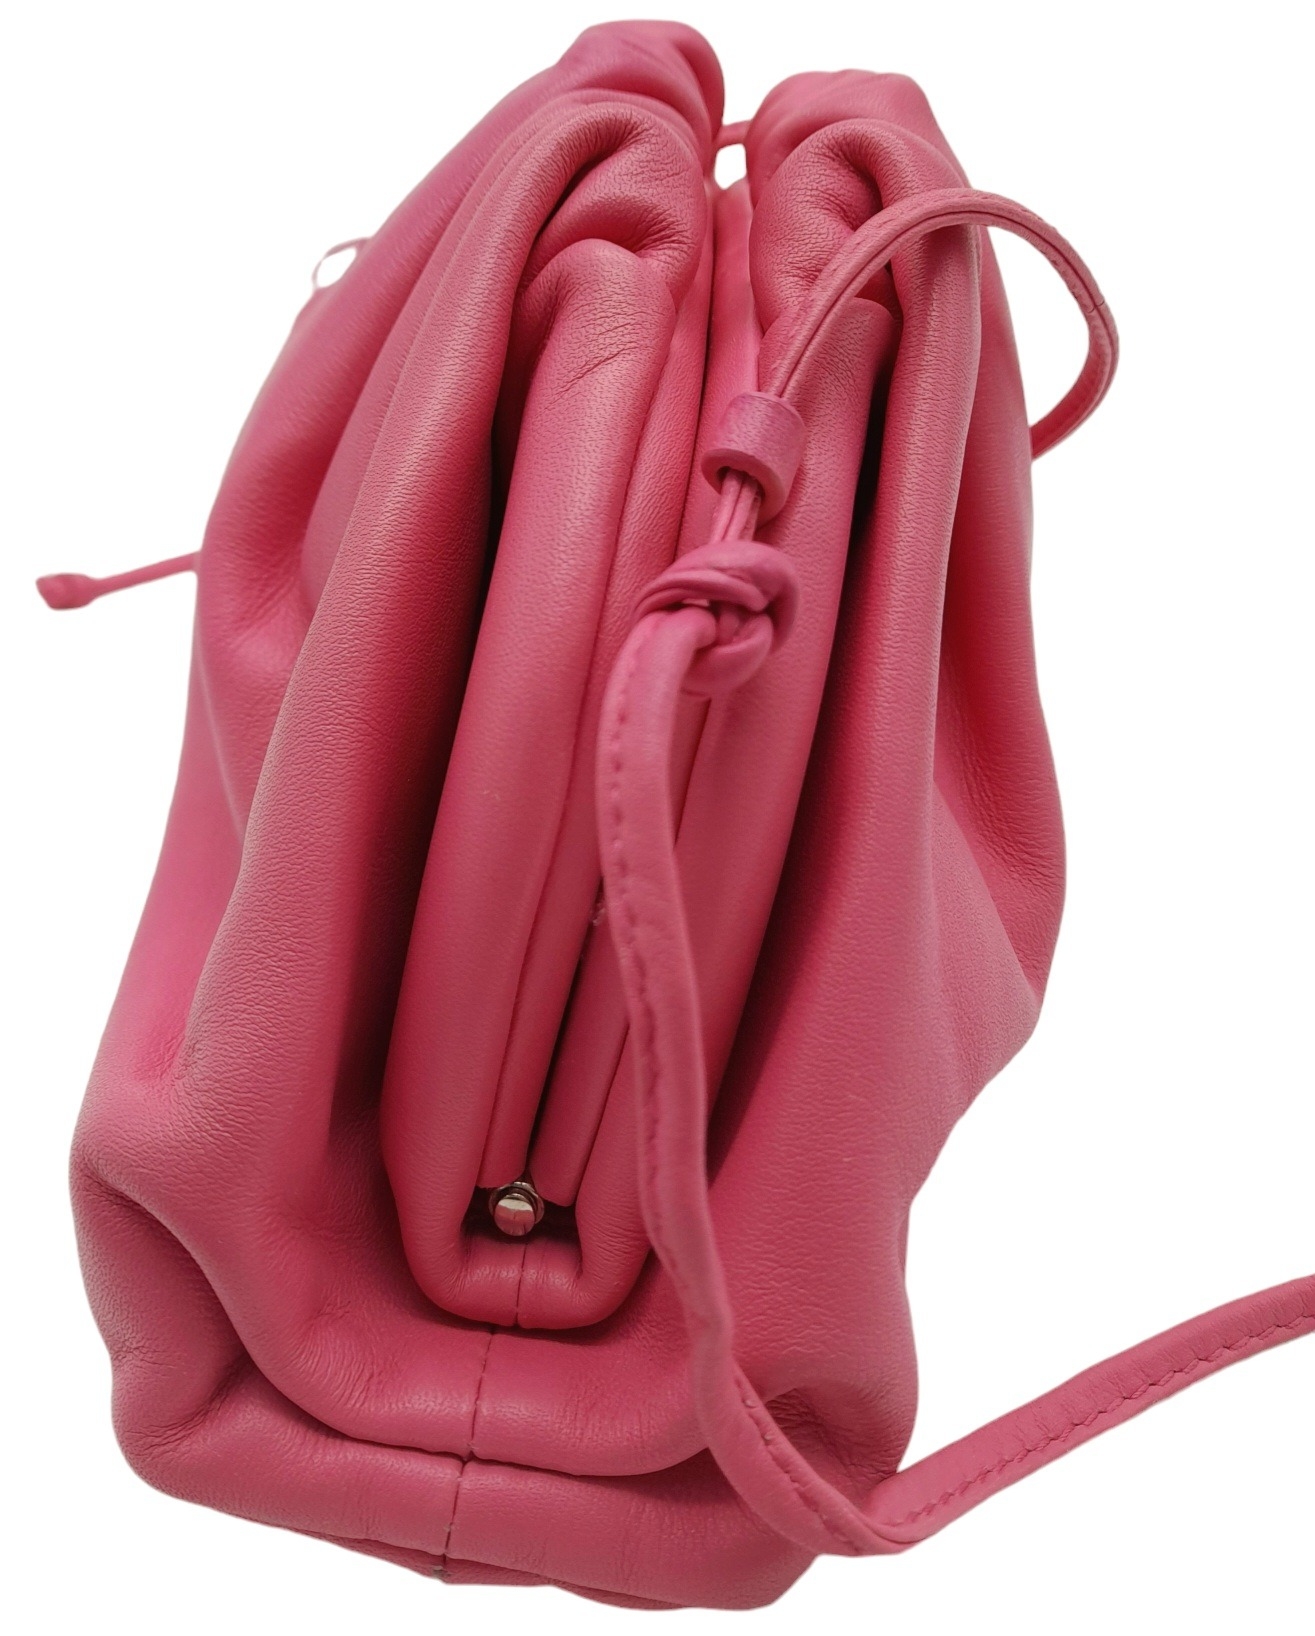 A Bottega Veneta Pink Mini Pouch Bag. Leather exterior with thin strap and magnetic closure. Pink - Image 8 of 9